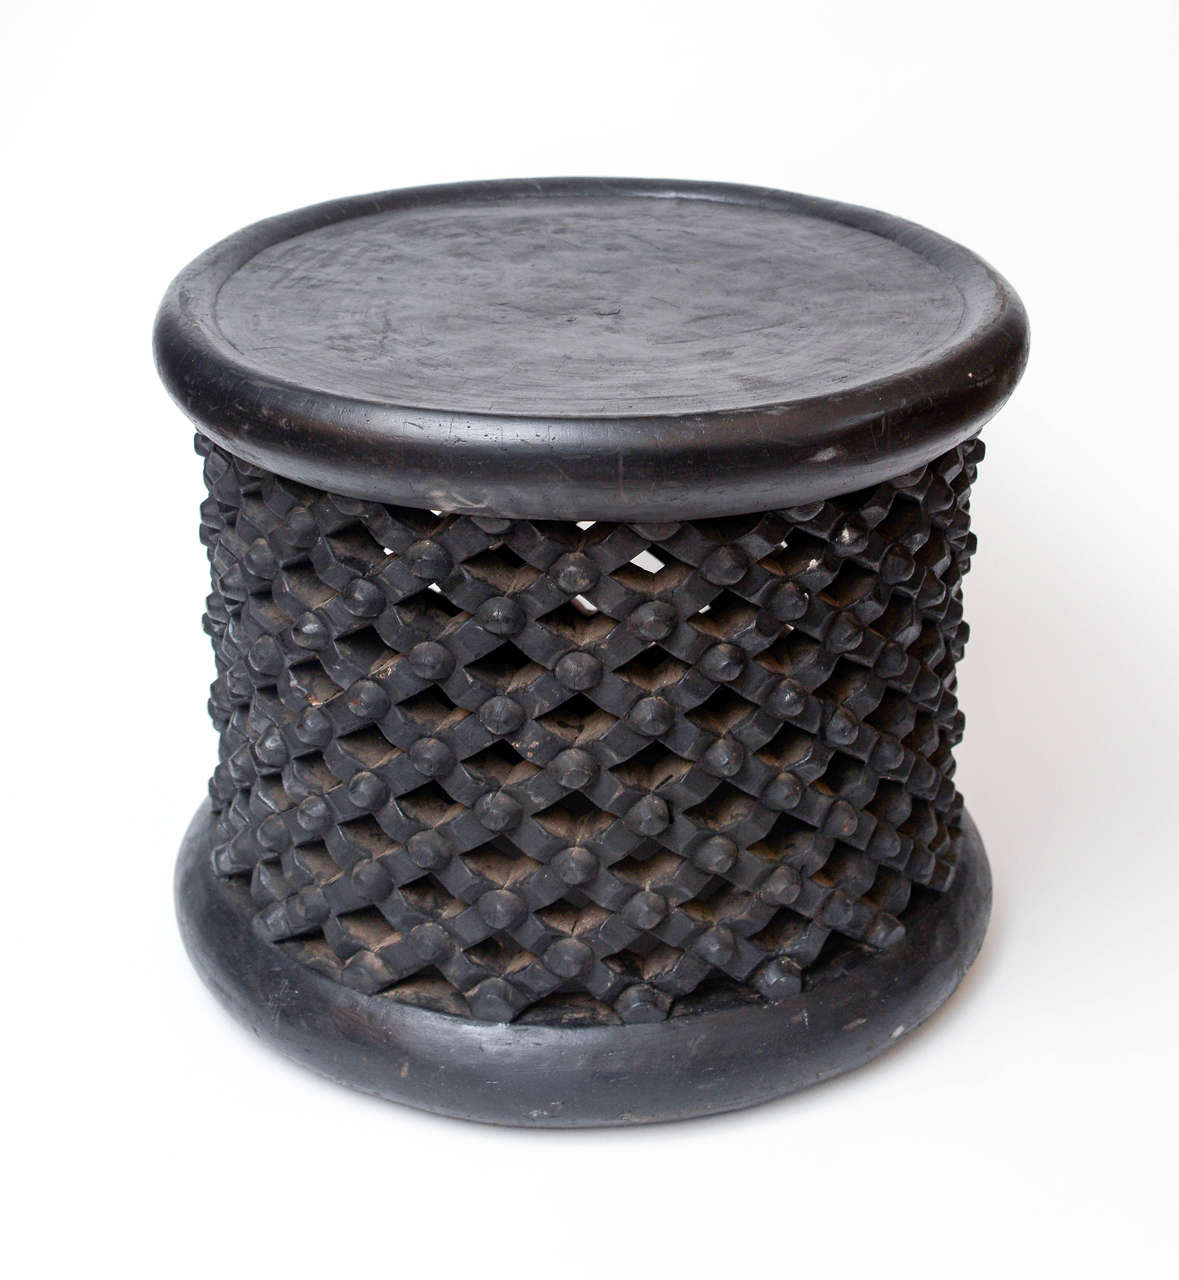 Small black African round table or stool.